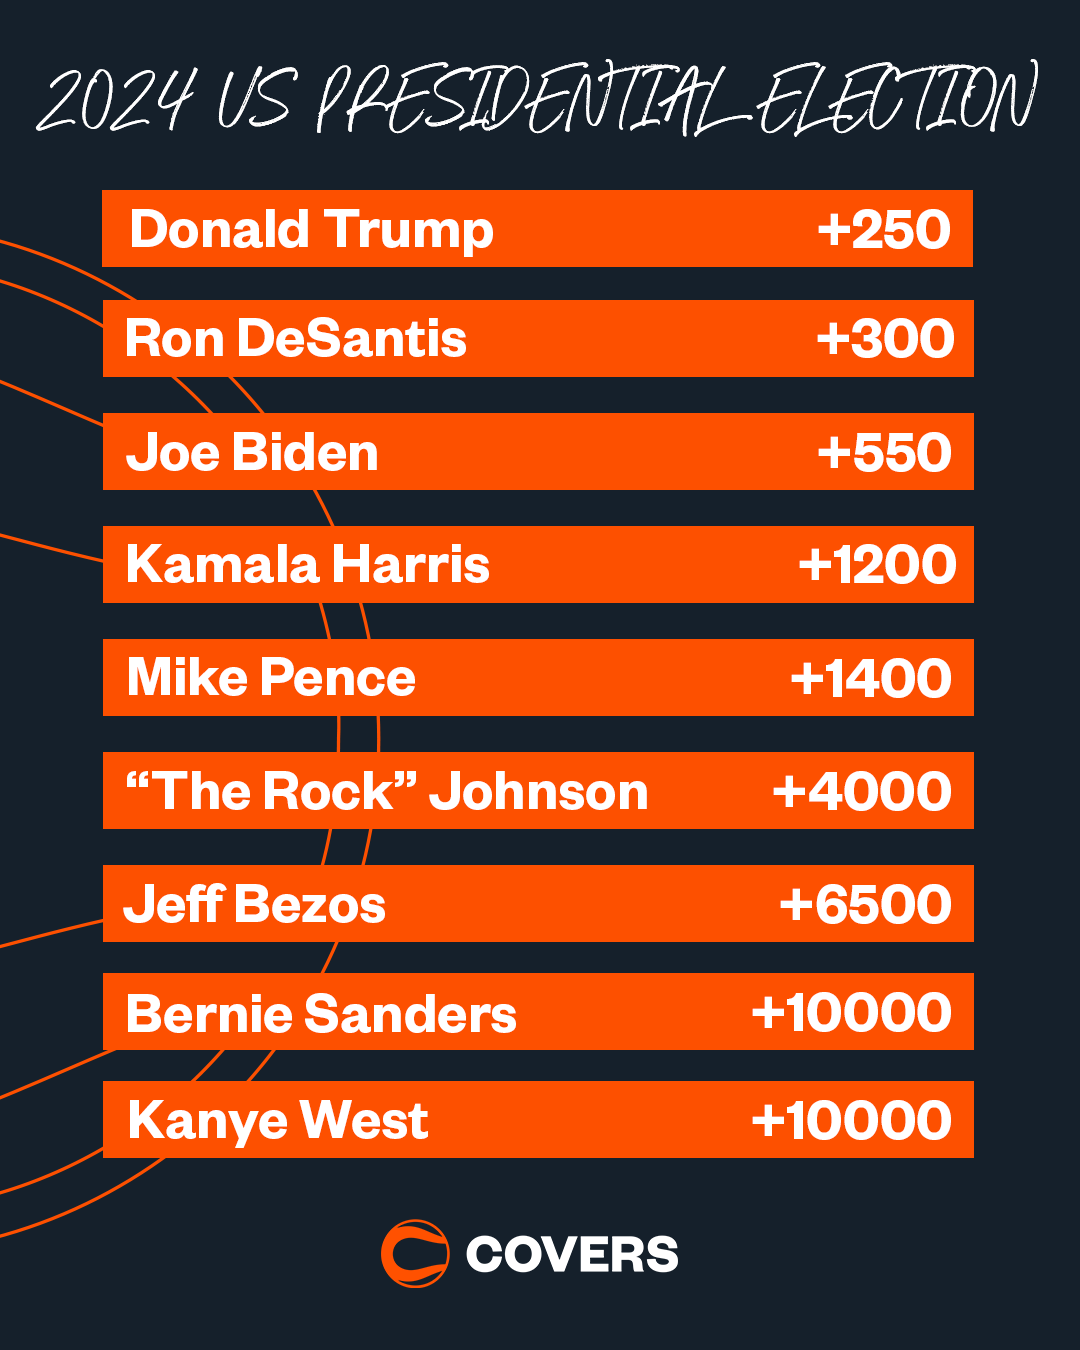 Covers on X: 'Presidential election odds are seeing plenty of movement with  Donald Trump ahead of Ron DeSantis and Joe Biden as the US election betting  favorite. We bring you 2024 election